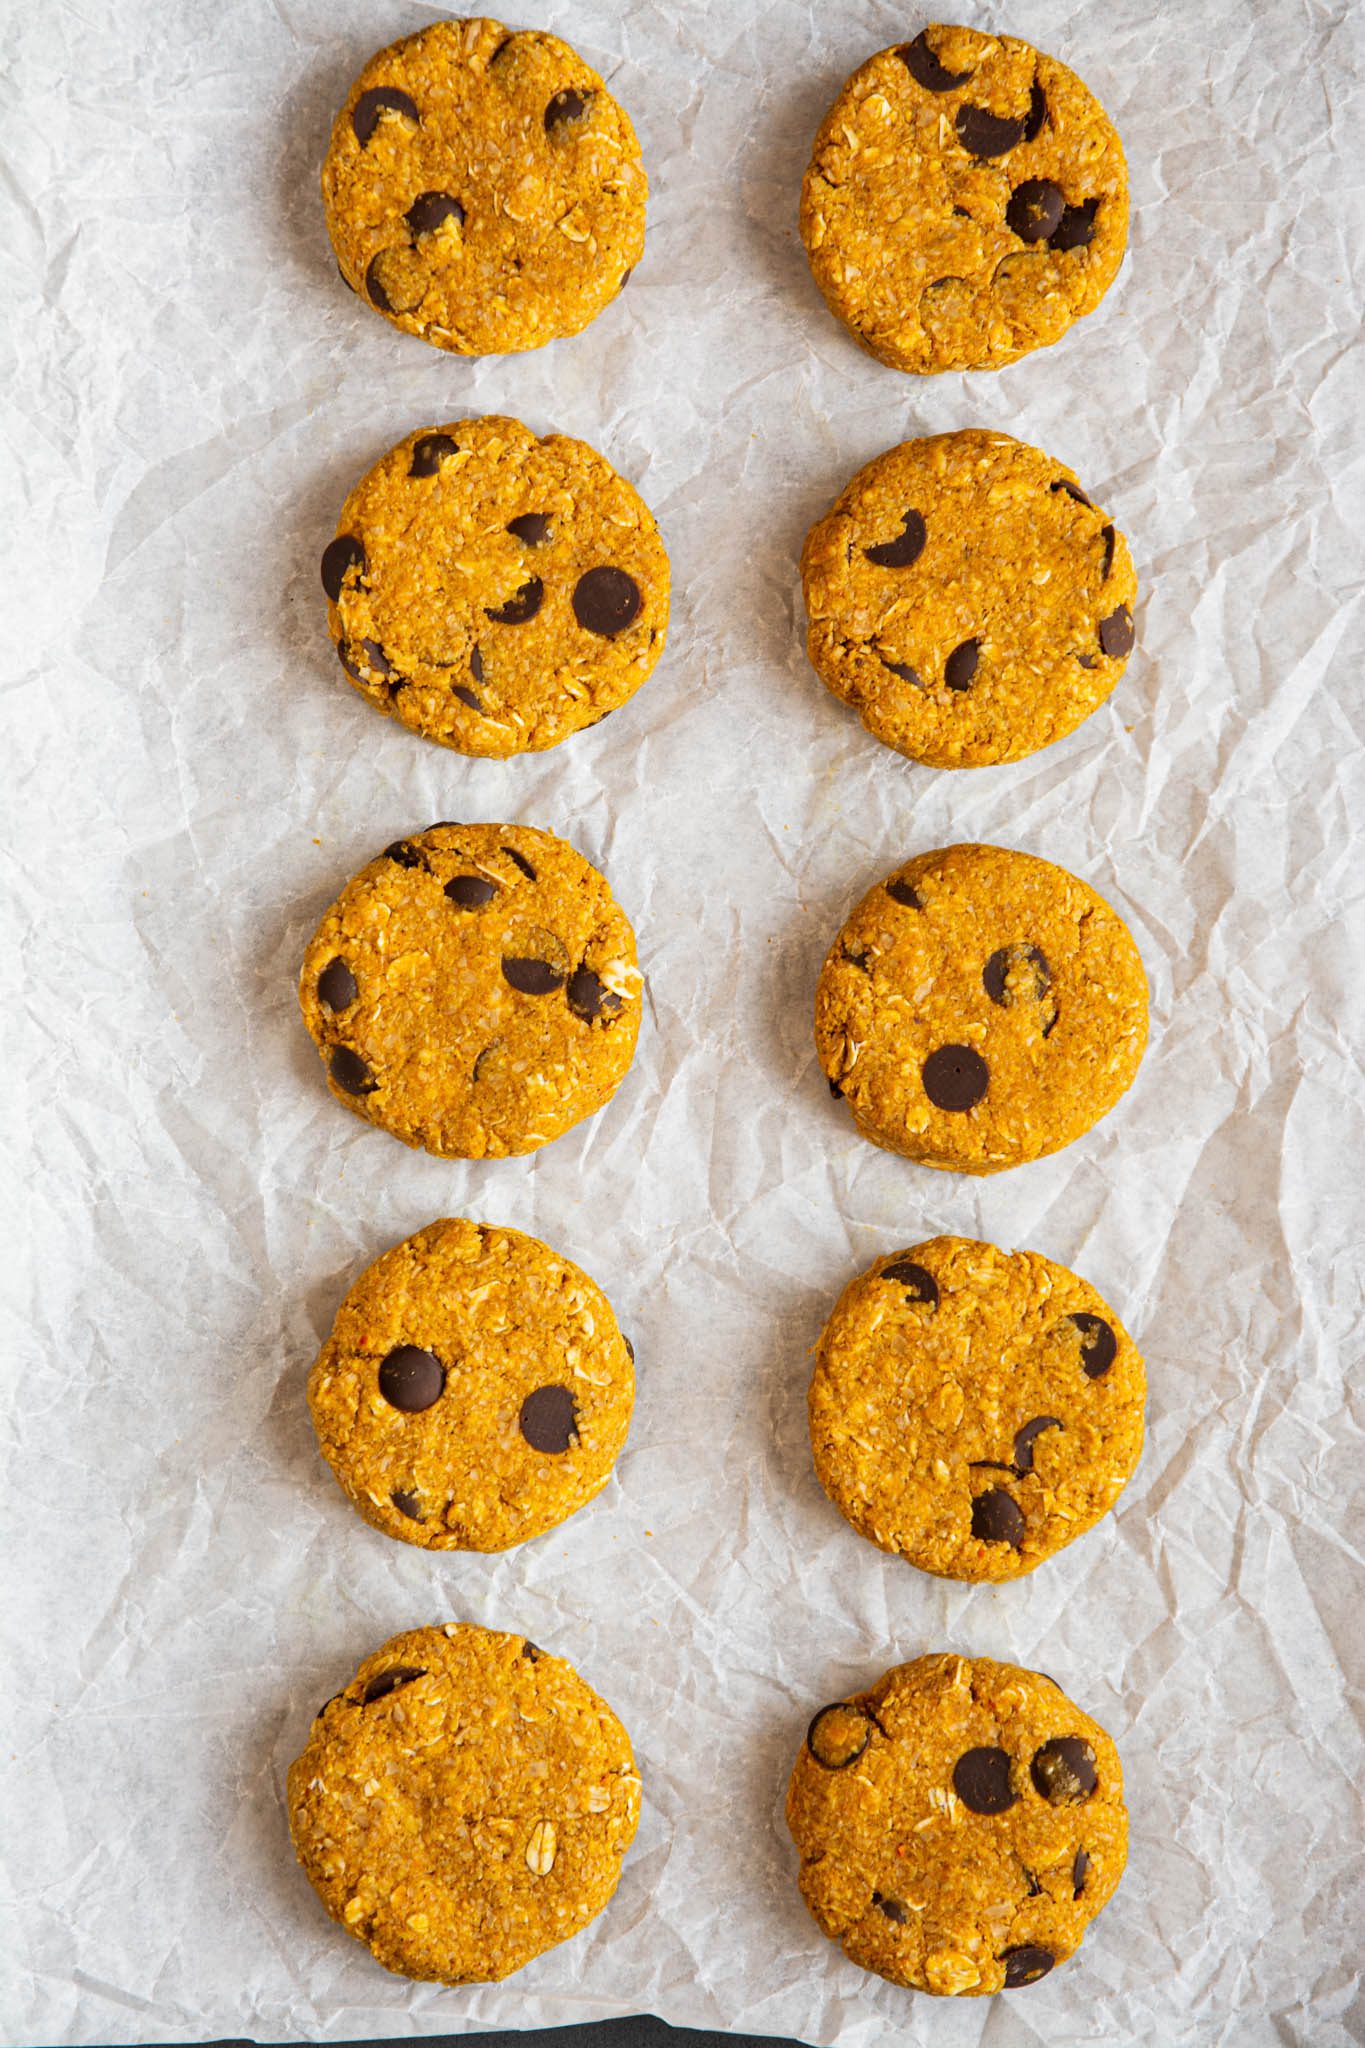 Learn how to make easy vegan pumpkin chocolate chip cookies that are extra fibrous and super satiating. They are excellent with a cup of tea or coffee for breakfast, snack, or as a healthy dessert.